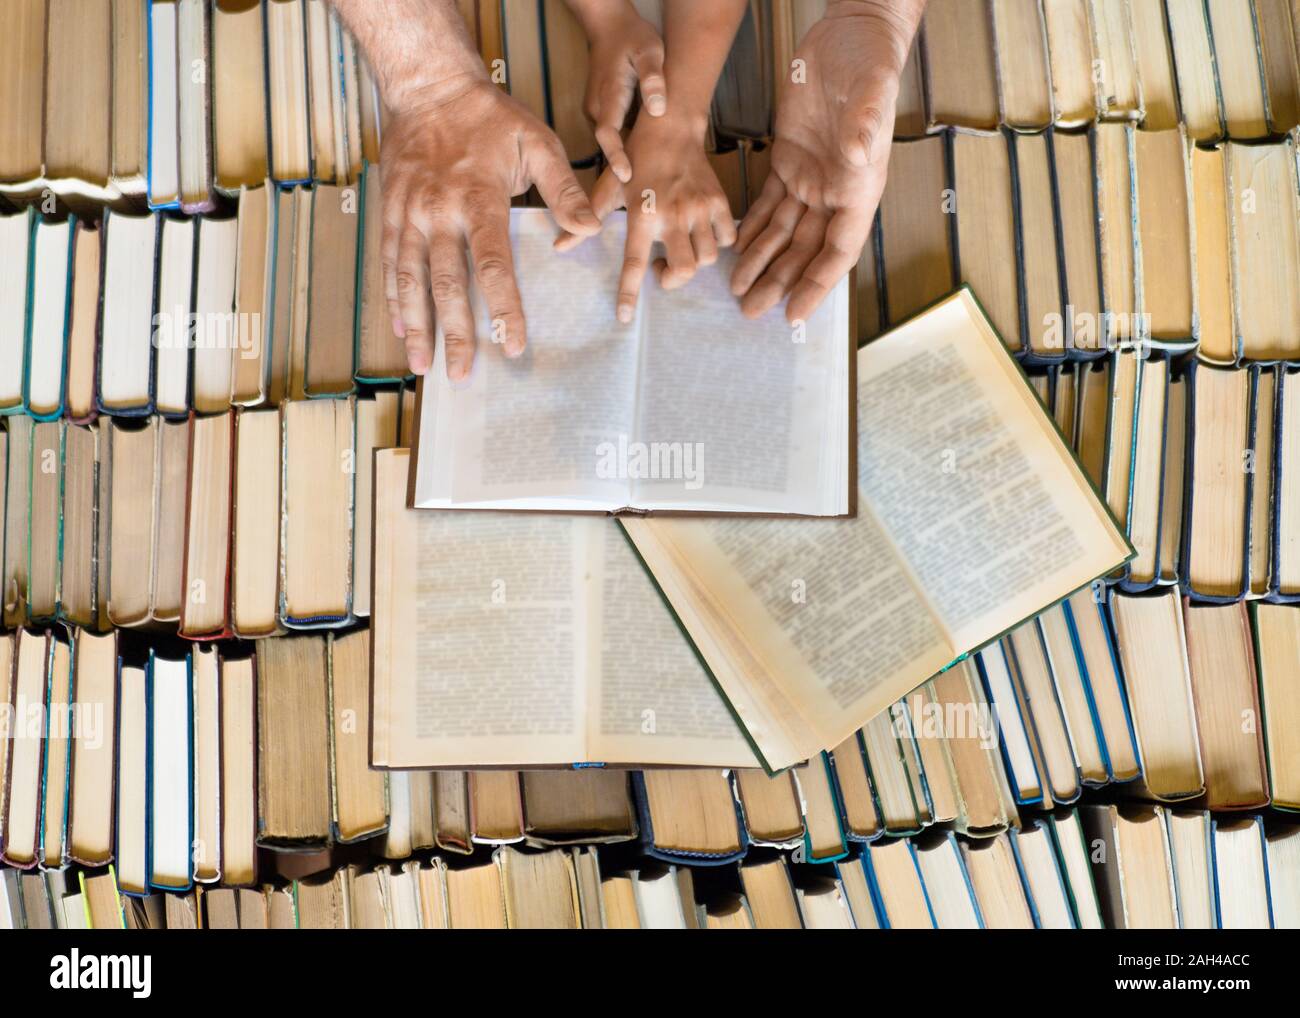 Hands of a man and kid over a lot of books. Teaching, study and knouledge concept. Father teachig his daughter Stock Photo